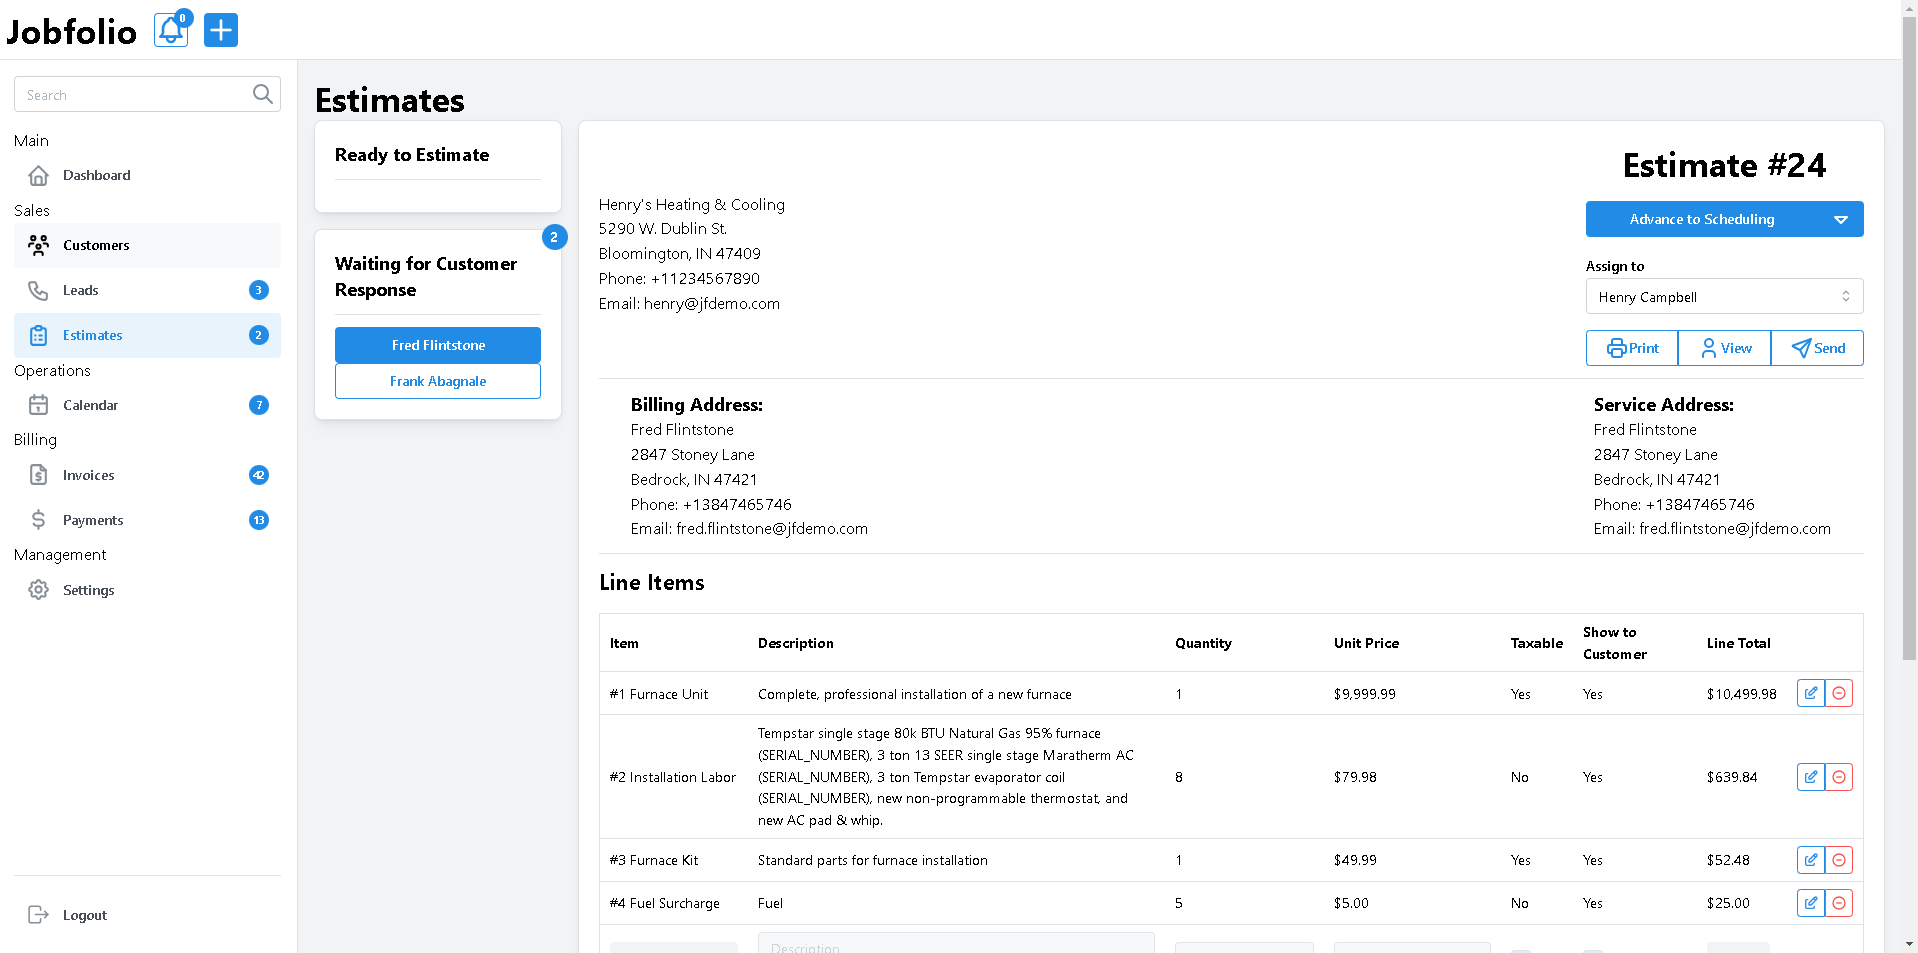 Creating an estimate is easy with a quick dropdown menu of billable items and pre-filled descriptions. Customers can review and accept estimates all on their own, so you don't have to chase them down!